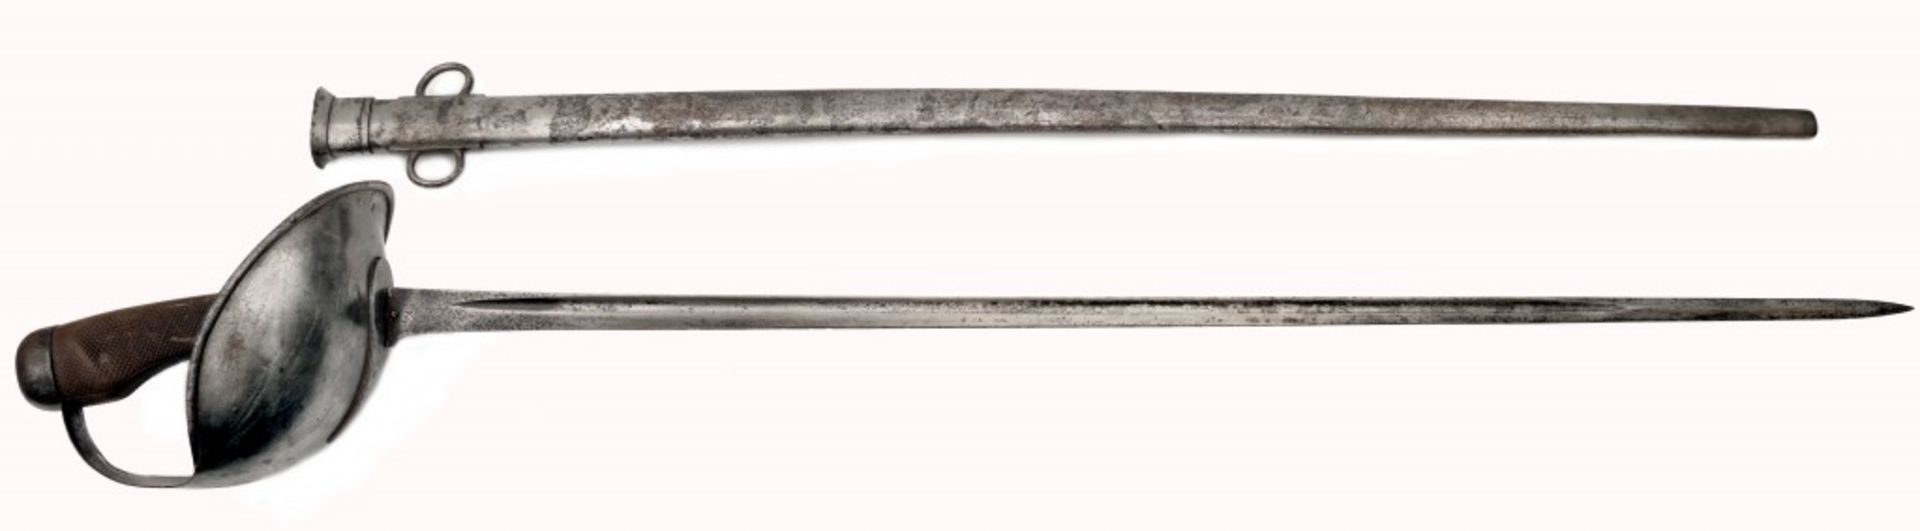 A 1908 Pattern British Cavalry Sword - Image 3 of 6